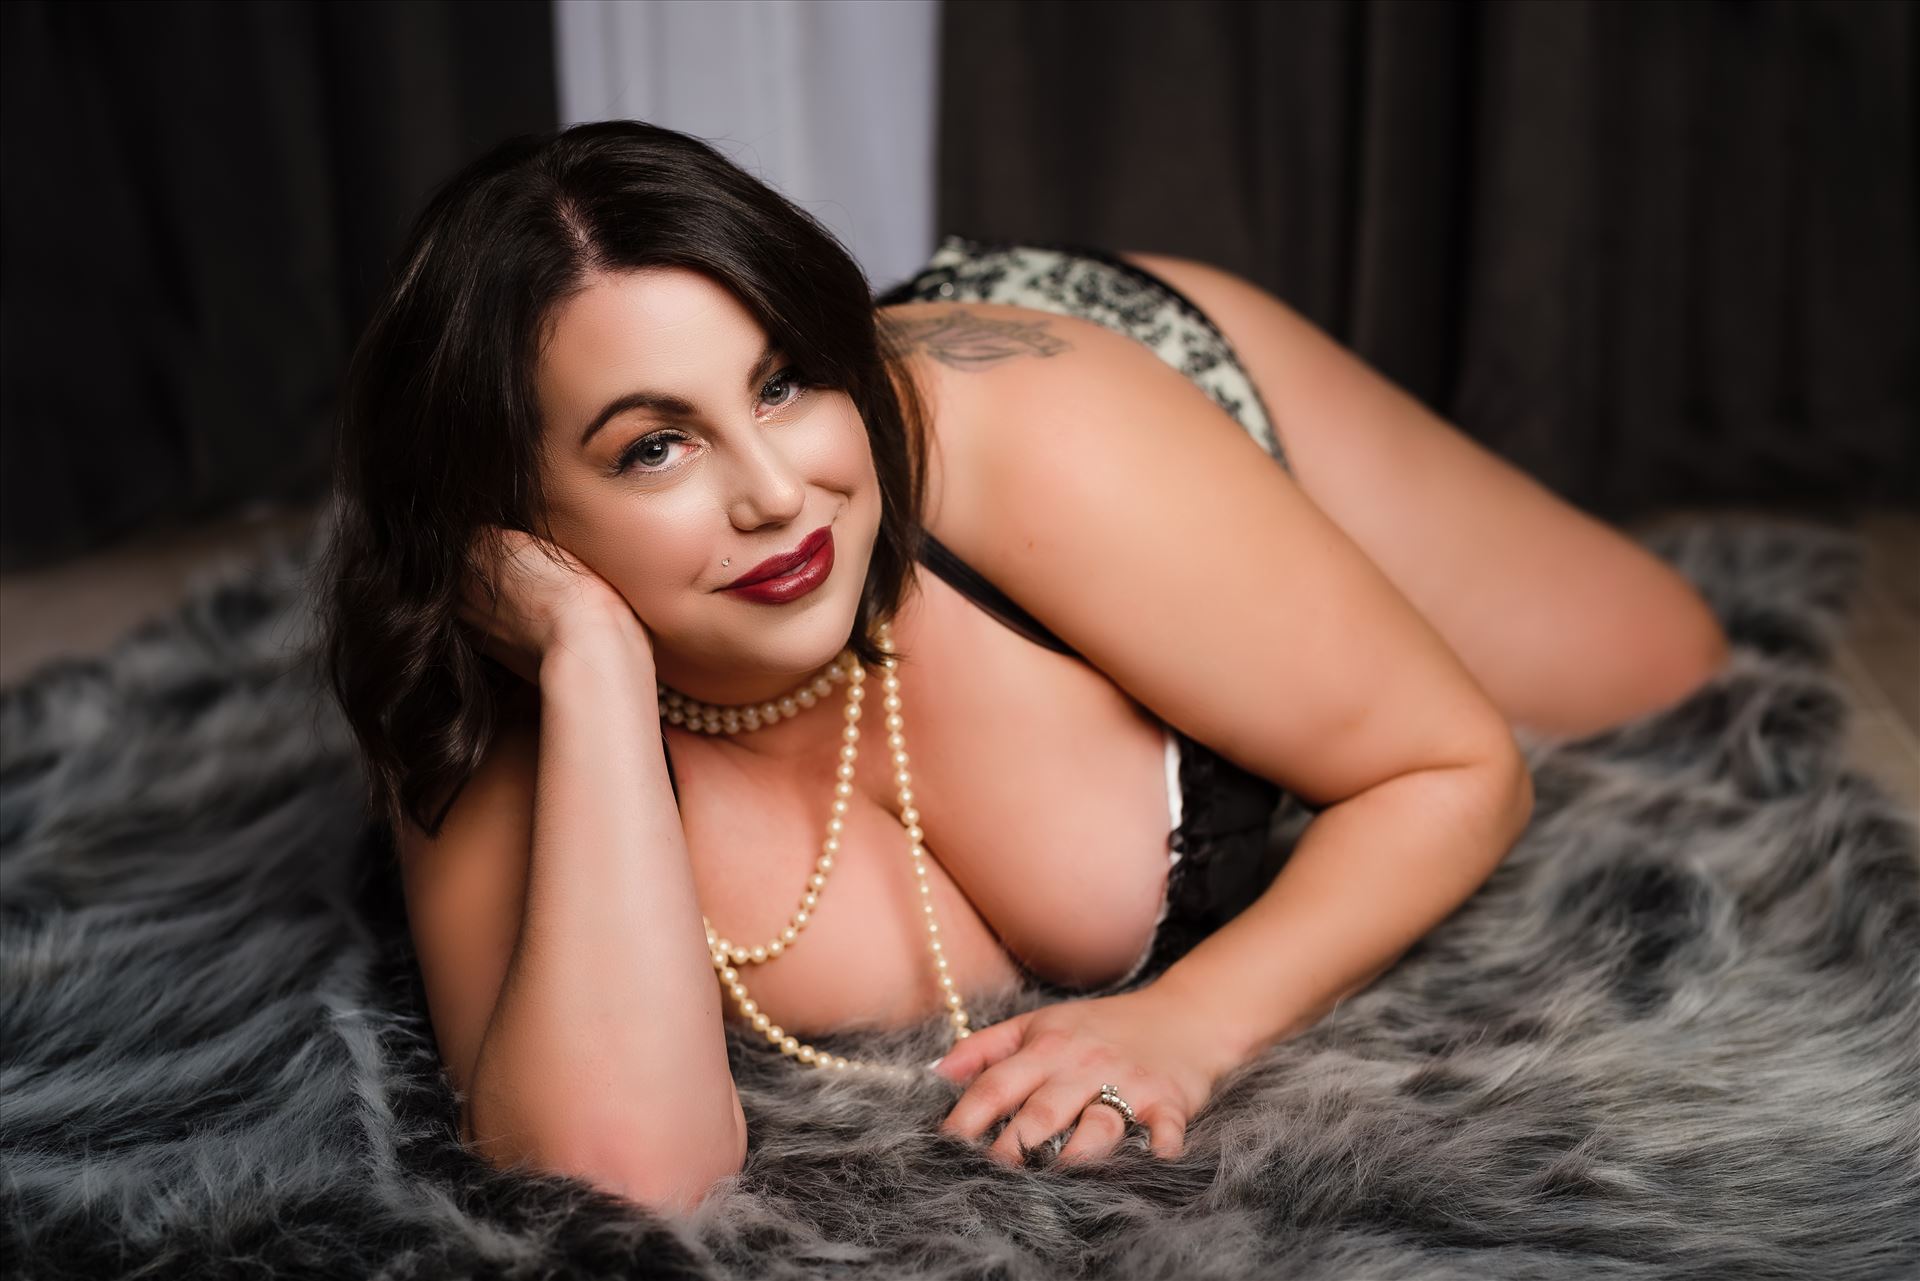 port nw-6084.JPG Beachfront Boudoir by Mirror's Edge Photography is a Boutique Luxury Boudoir Photography Studio located just blocks from the beach in Oceano, California. My mission is to show as many women as possible how beautiful they truly are! by Sarah Williams